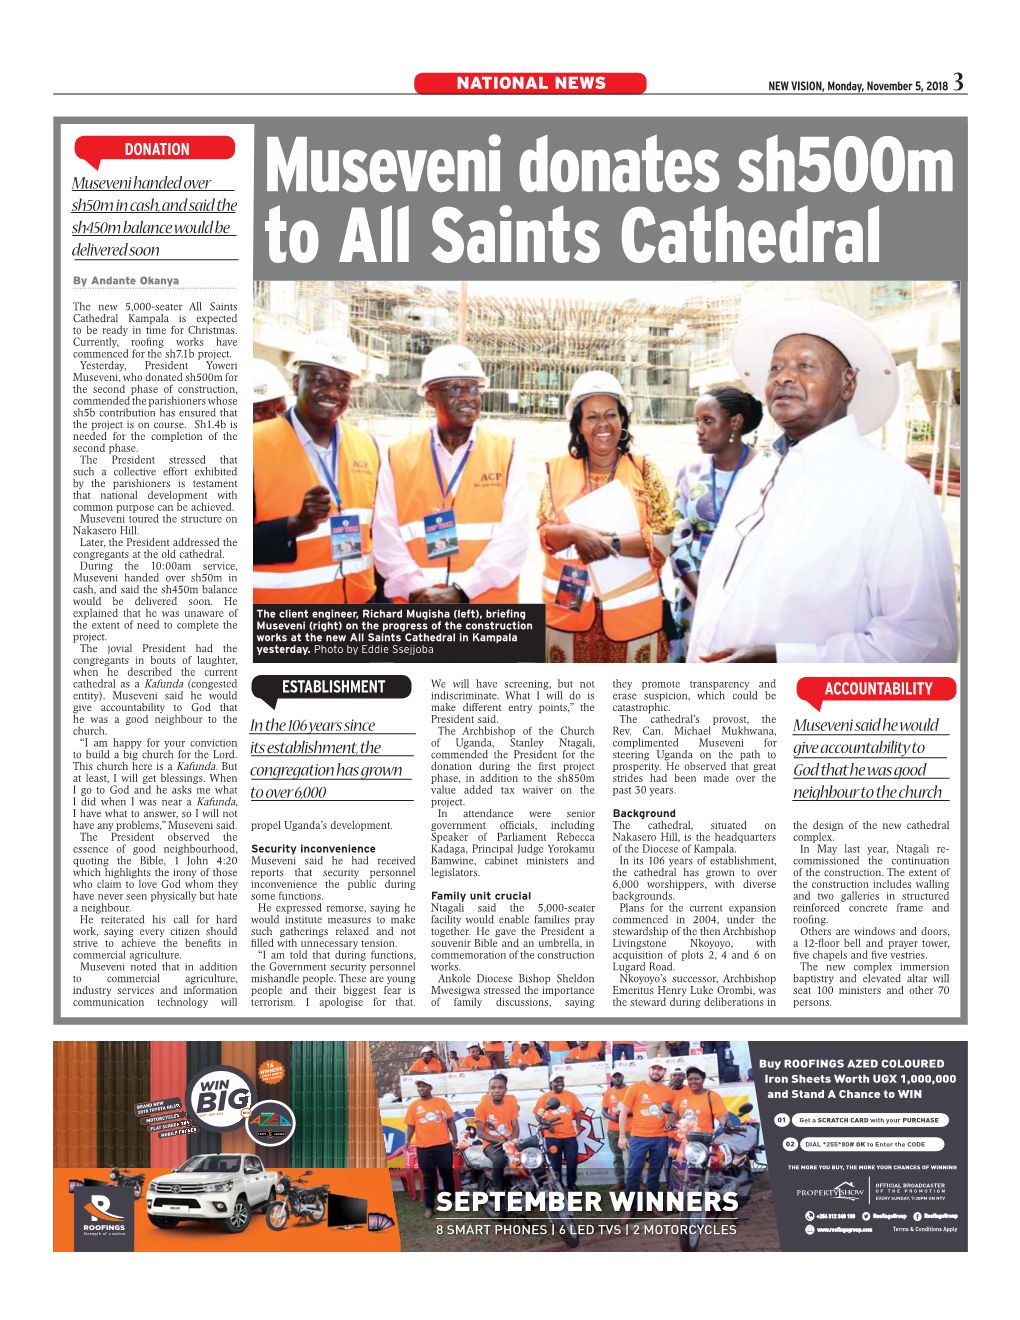 Museveni Donates Sh500m to All Saints Cathedral